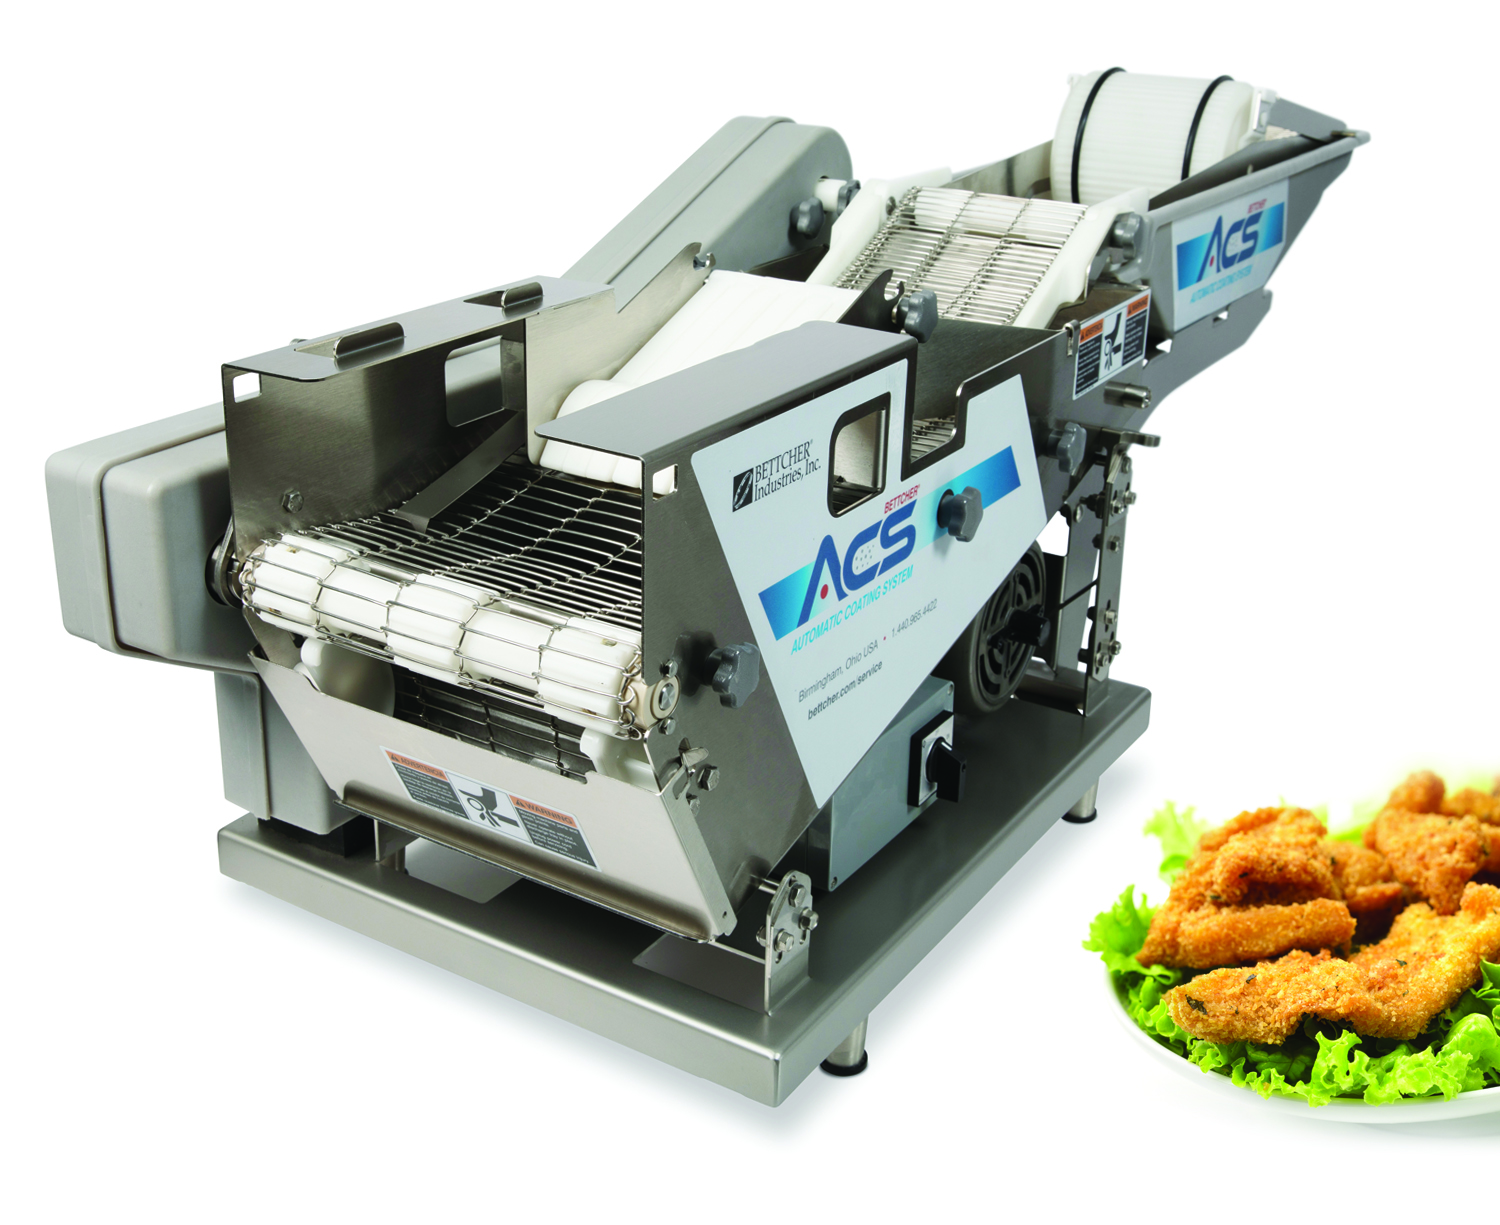 The new Automatic Coating System from Bettcher Industries delivers consistent high-quality food products compared to hand-breading and frozen pre-breaded menu items.